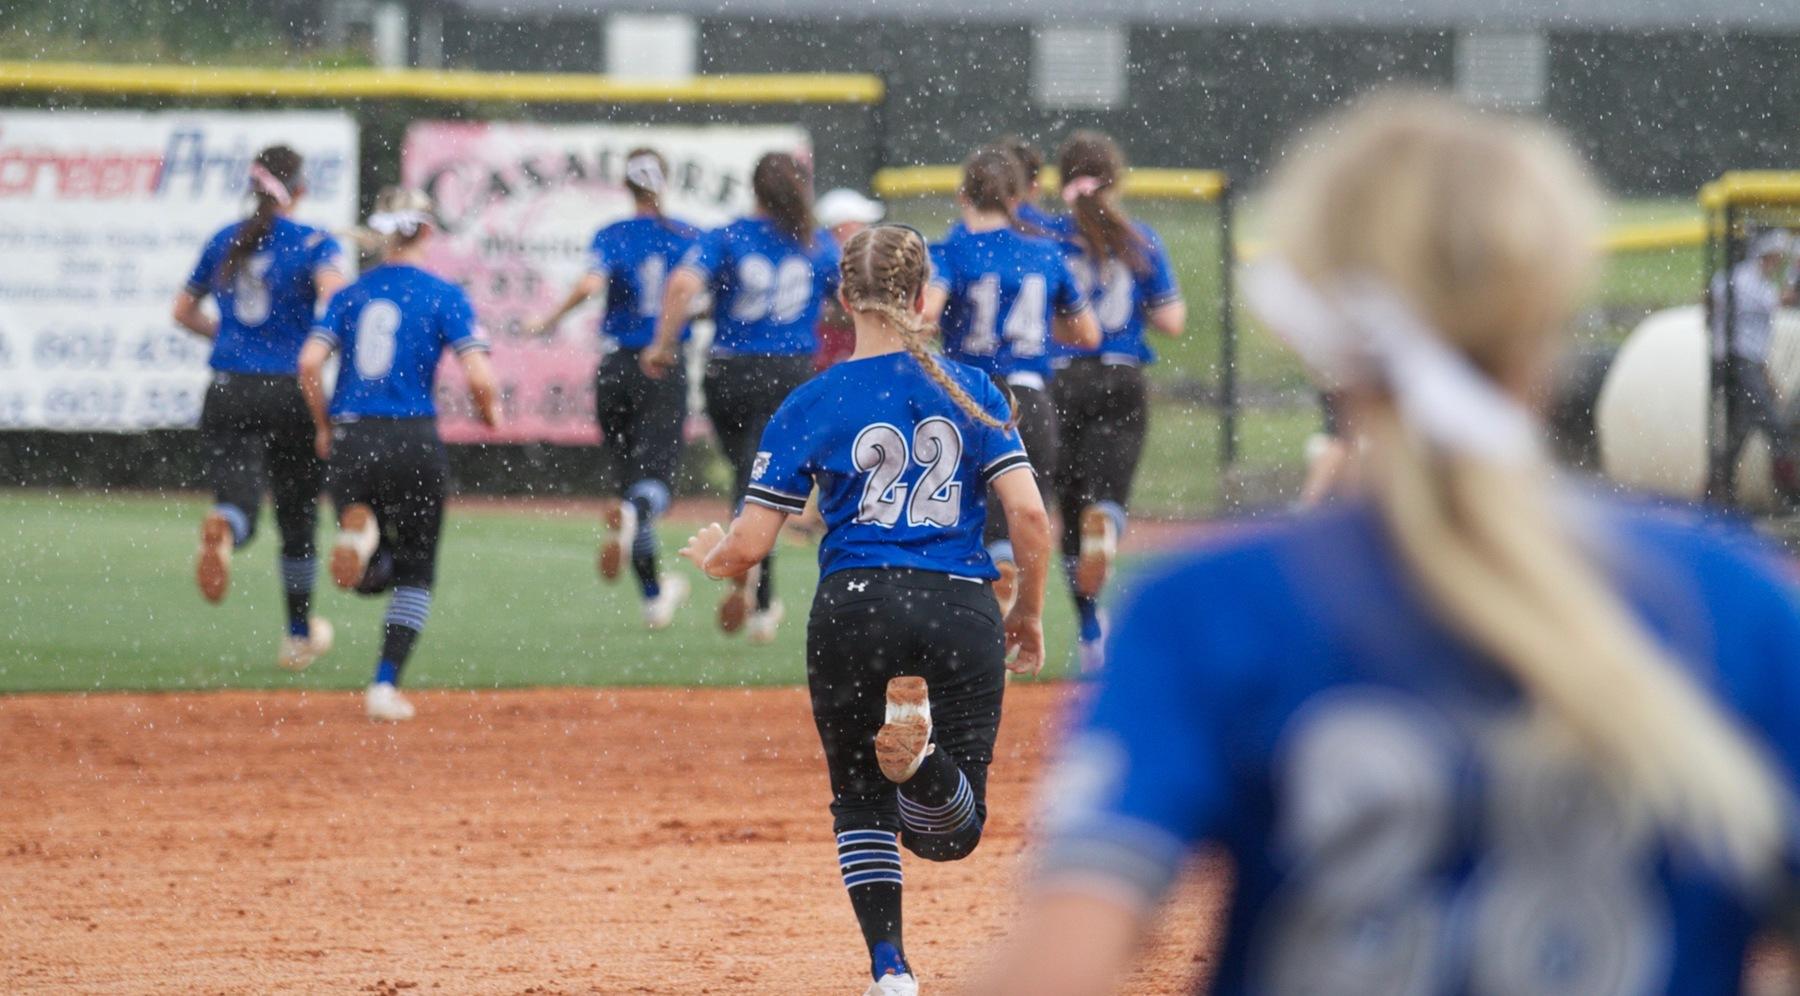 Co-Lin and Southwest delayed by rain